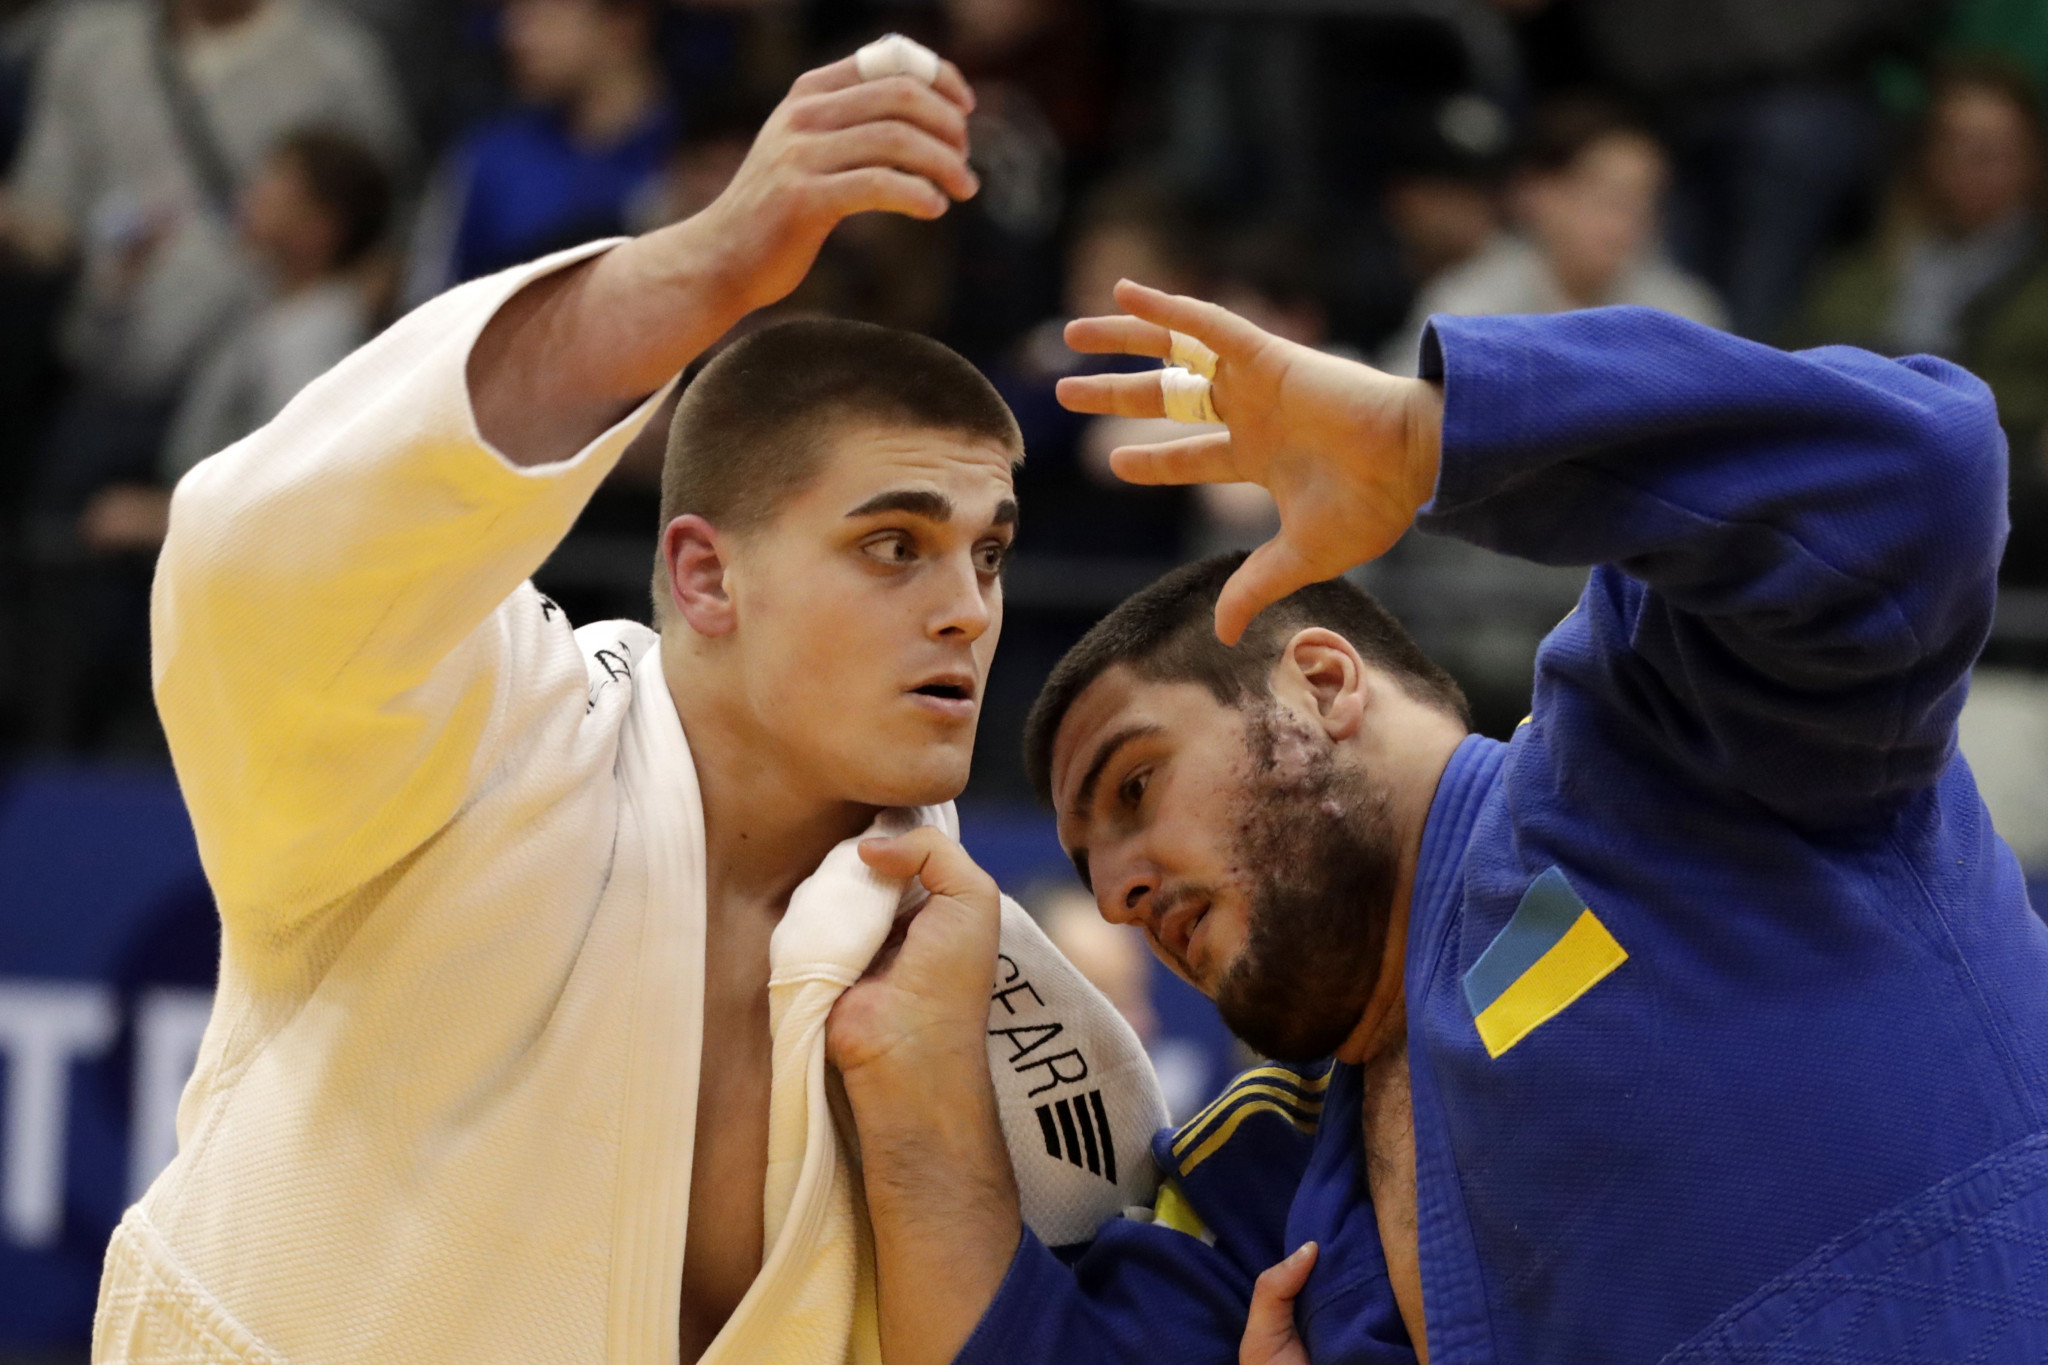 Ukraine had previously boycotted an IJF event because of the organisation's decision to allow Russian and Belarusians athletes to compete as neutrals ©Getty Images